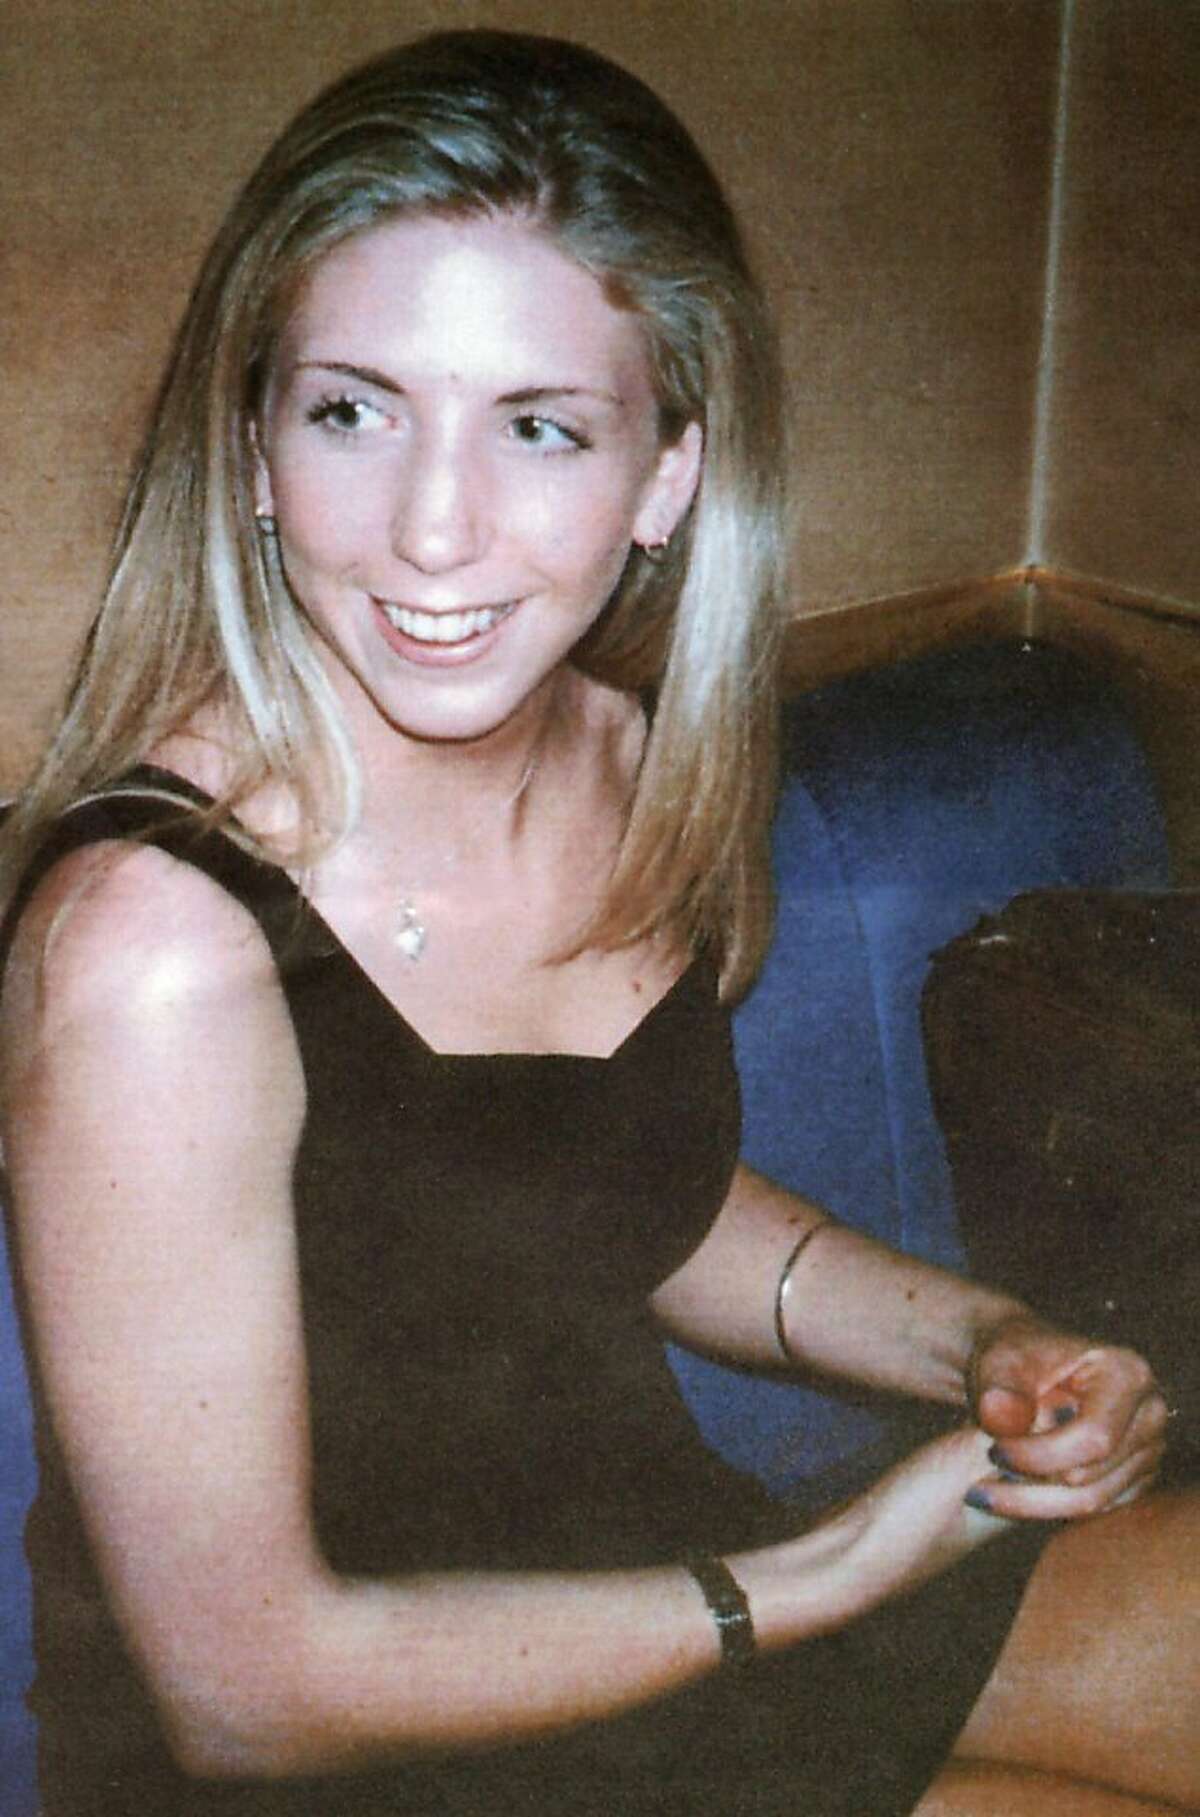 Tokyo, JAPAN: (FILES) This undated picture taken from a police poster shows Lucie Blackman, the murdered British bar hostess who disappeared 01 July 2000 in Japan. A Japanese businessman was sentenced to life in prison 24 April 2007 for a wave of brutal assaults on women, but was cleared over the abduction and killing of Blackman. Joji Obara, a 54-year-old former property developer, was convicted of raping nine women. One of them, Australian Carita Ridgway -- like Blackman a 21-year-old bar hostess -- died. The verdict is likely to trigger outrage in Britain, where Blackman's case triggered a storm of media coverage and even a personal appeal by Prime Minister Tony Blair. AFP PHOTO (Photo credit should read -/AFP/Getty Images)